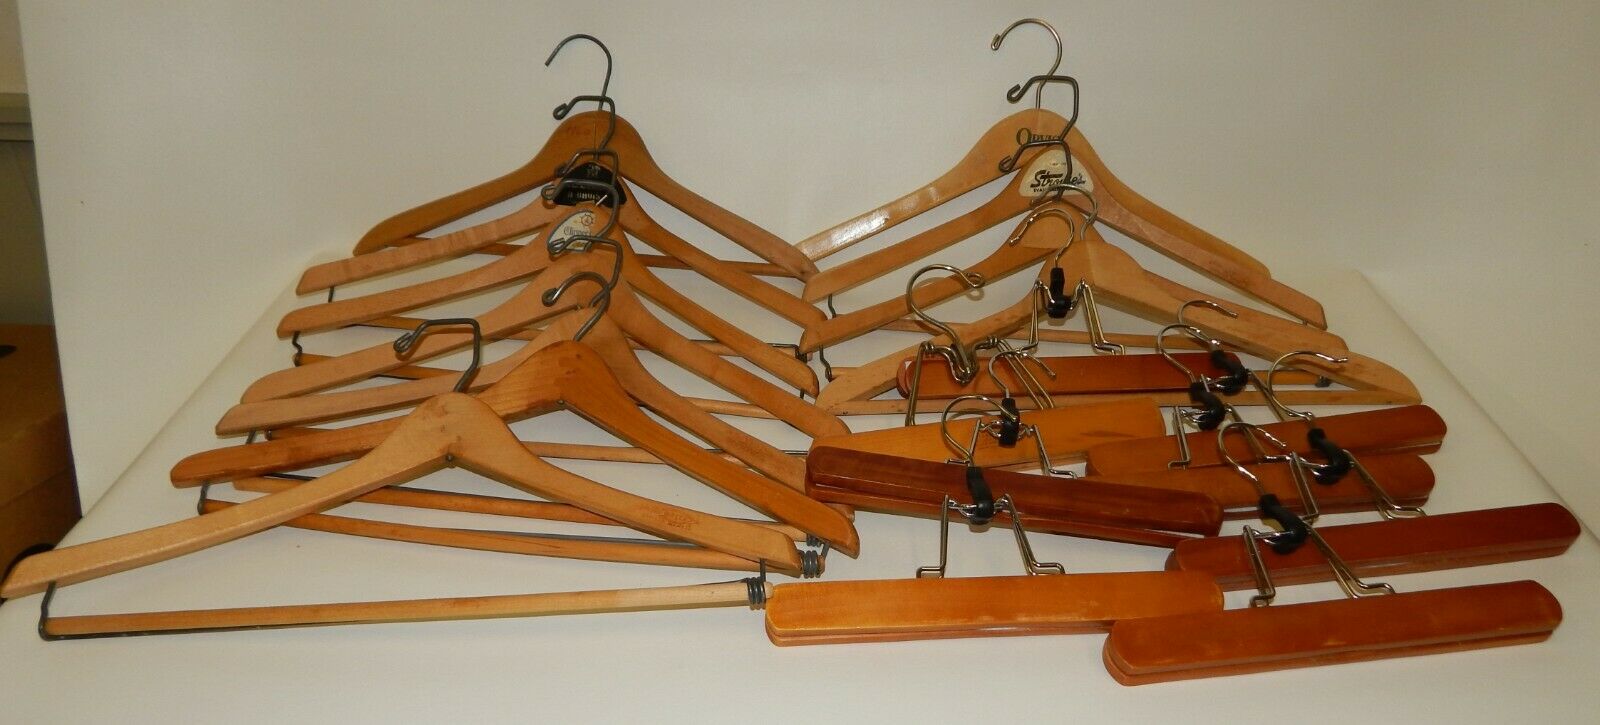 Lot Of Vintage Wooden Clothes Hangers - 11 Regular 8 Clamp - Nice!